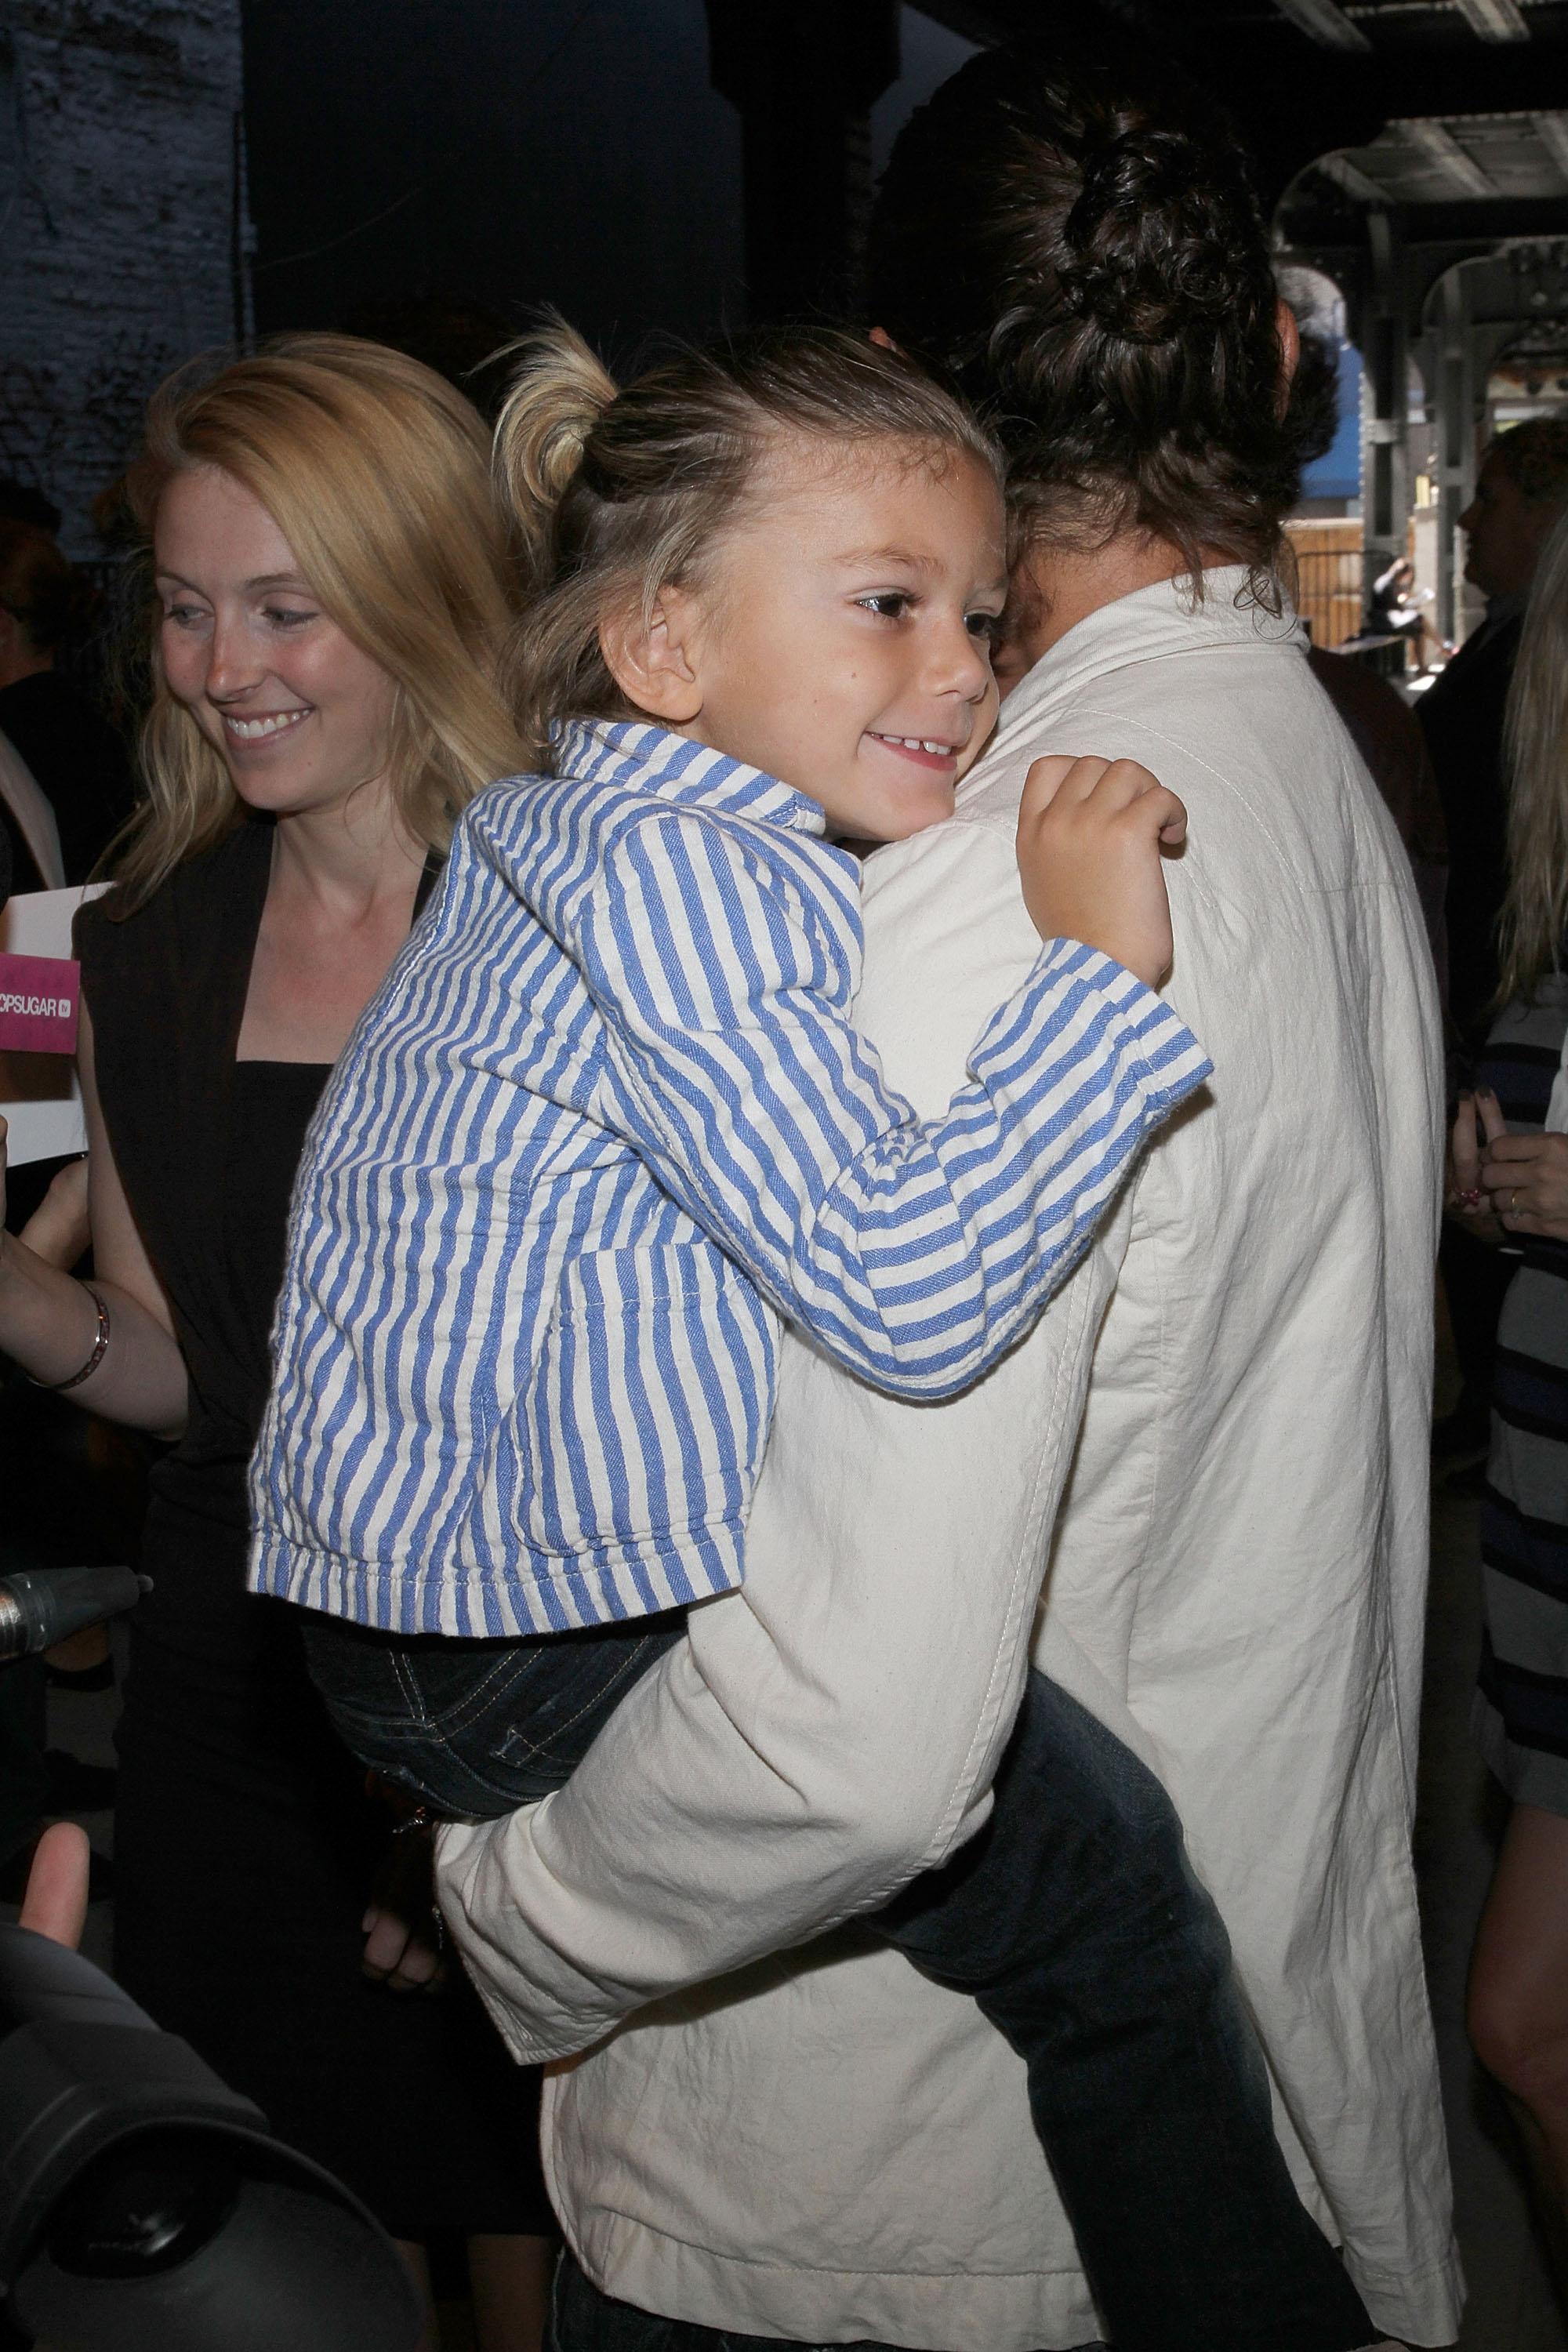 Gavin Rossdale and son Kingston fashion show during Mercedes-Benz Fashion Week at on September 11, 2010 in New York City | Source: Getty Images